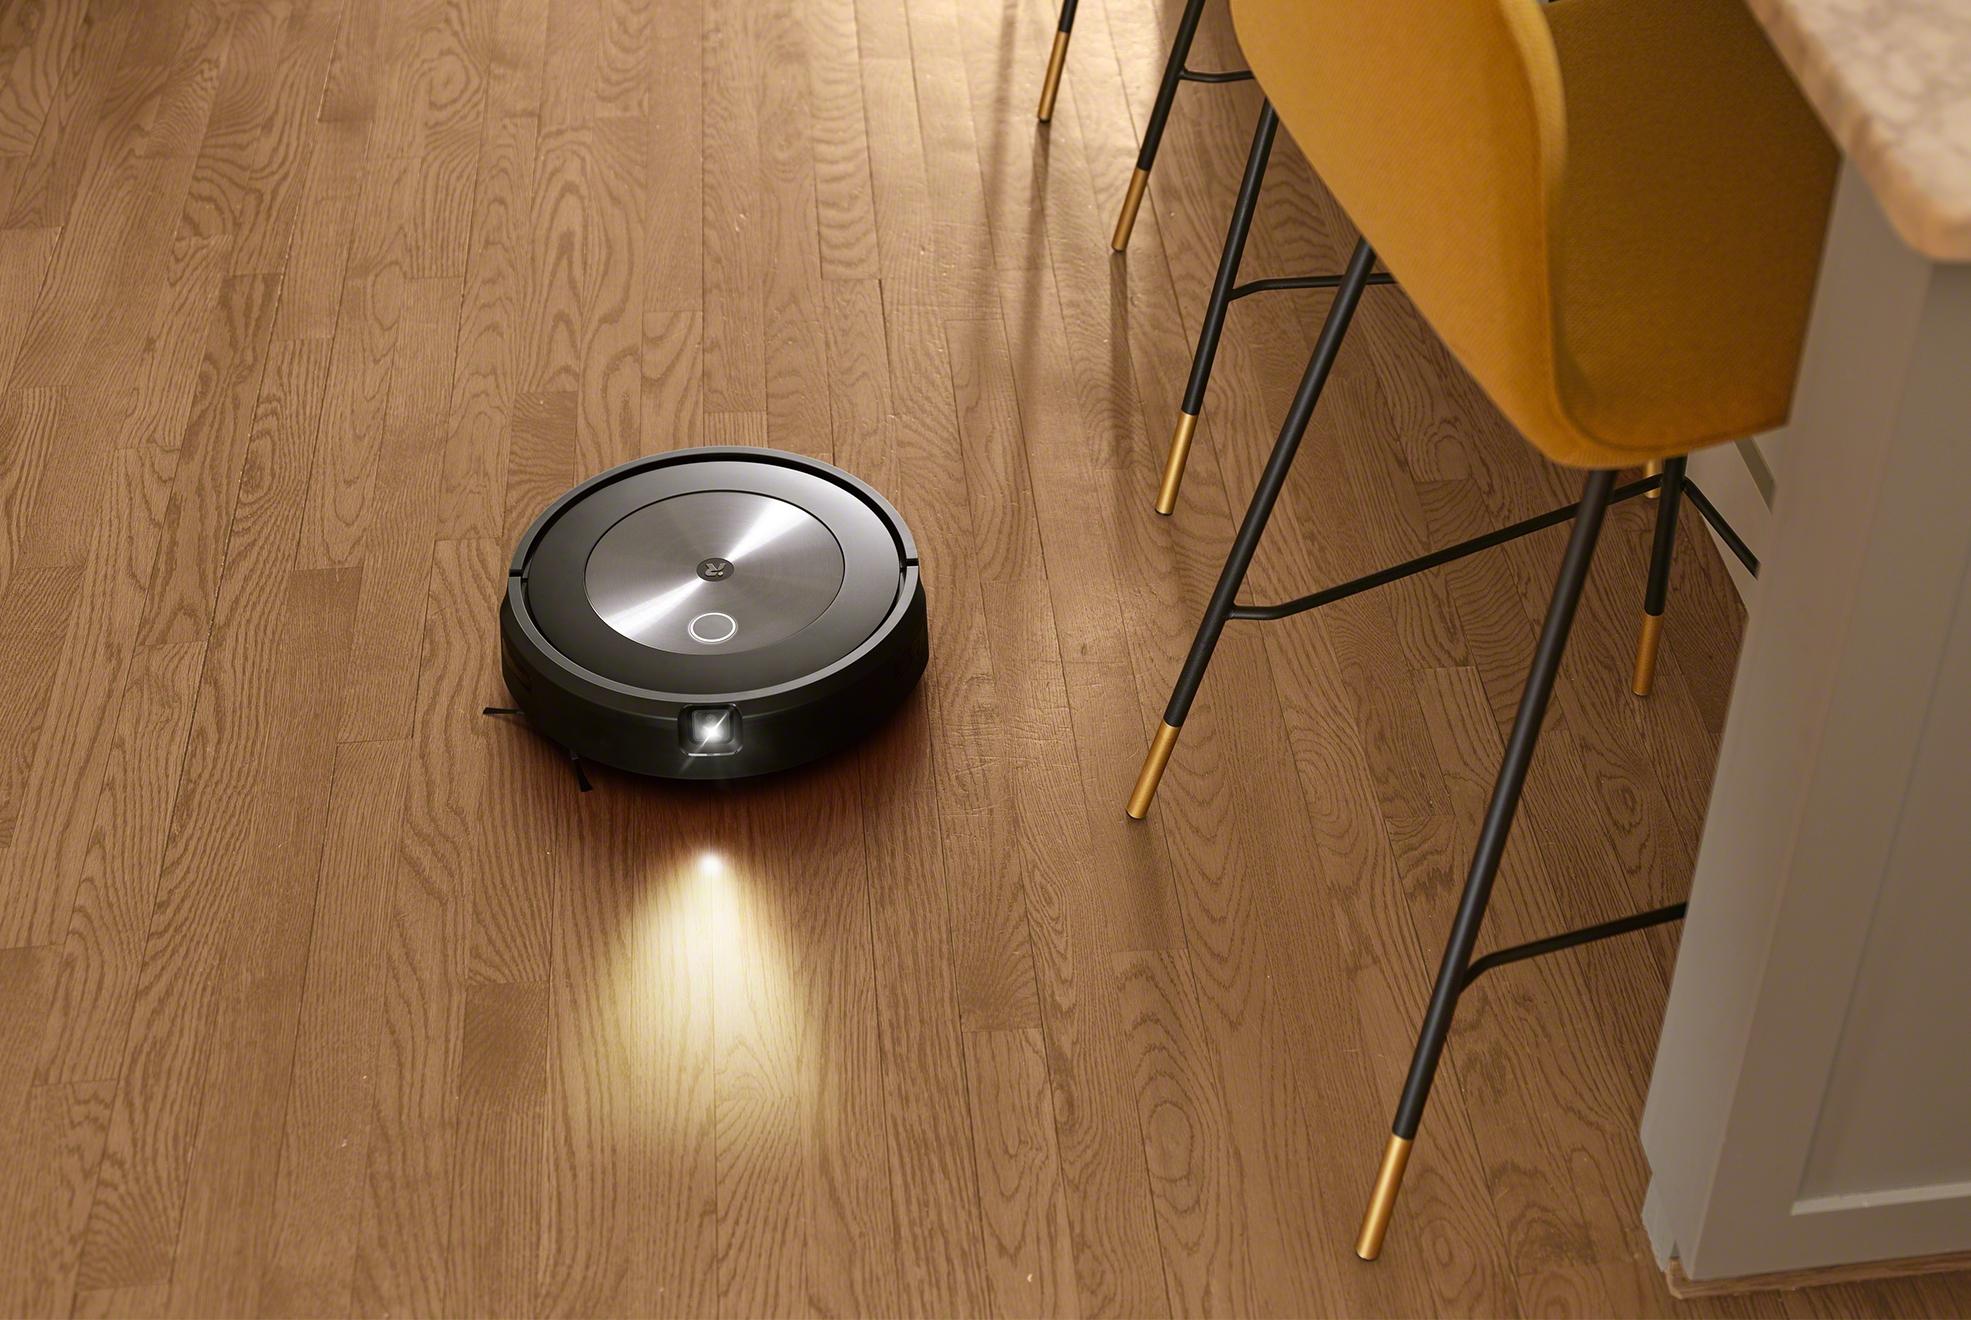 You Just Bought A Roomba J7: User Guide 